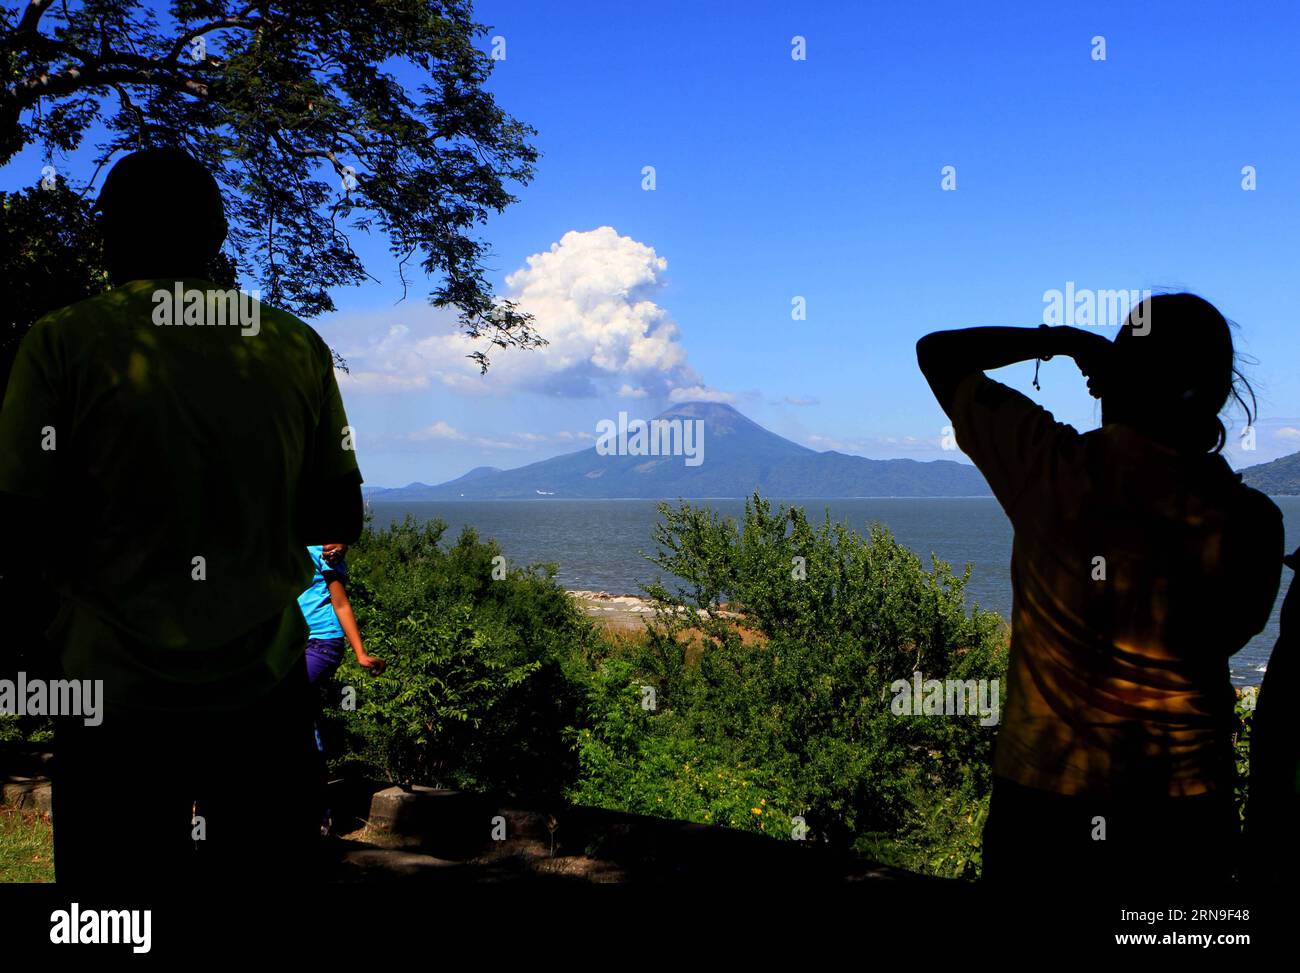 Nicaragua: Vulkan Momotombo ausgebrochen (151203) -- LEON, Dec. 2, 2015 -- People look at the Momotombo Volcano in La Paz Centro municipality, Leon department, western Nicaragua, on Dec. 2, 2015. Momotombo Volcano, located in the north of the Xolotlan Lake, western Nicaragua, continued its eruptive activity in the last hours, with incandescent material observed on its crater, according to the Municipal Committees of Disaster Prevention. ) NICARAGUA-LEON-ENVIRONMENT-VOLCANO JOHNxBUSTOS PUBLICATIONxNOTxINxCHN   Nicaragua Volcano Momotombo erupted 151203 Leon DEC 2 2015 Celebrities Look AT The Mo Stock Photo